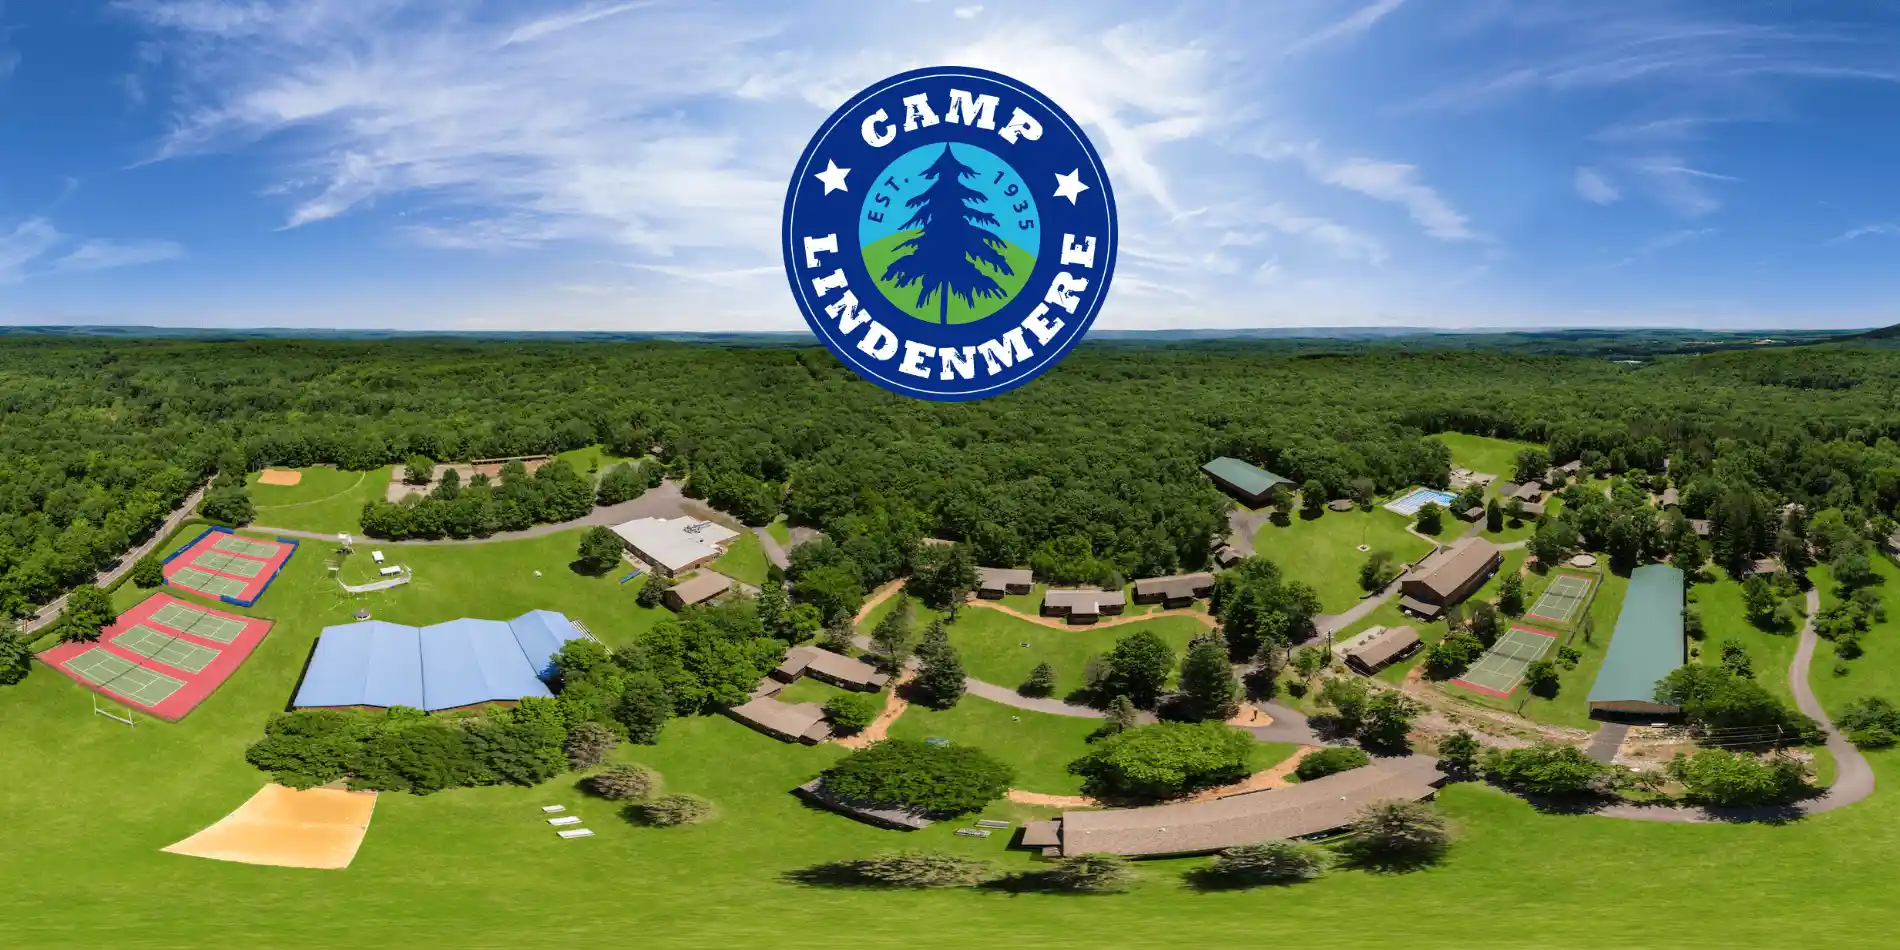 Camp Lindenmere - Cover Photo